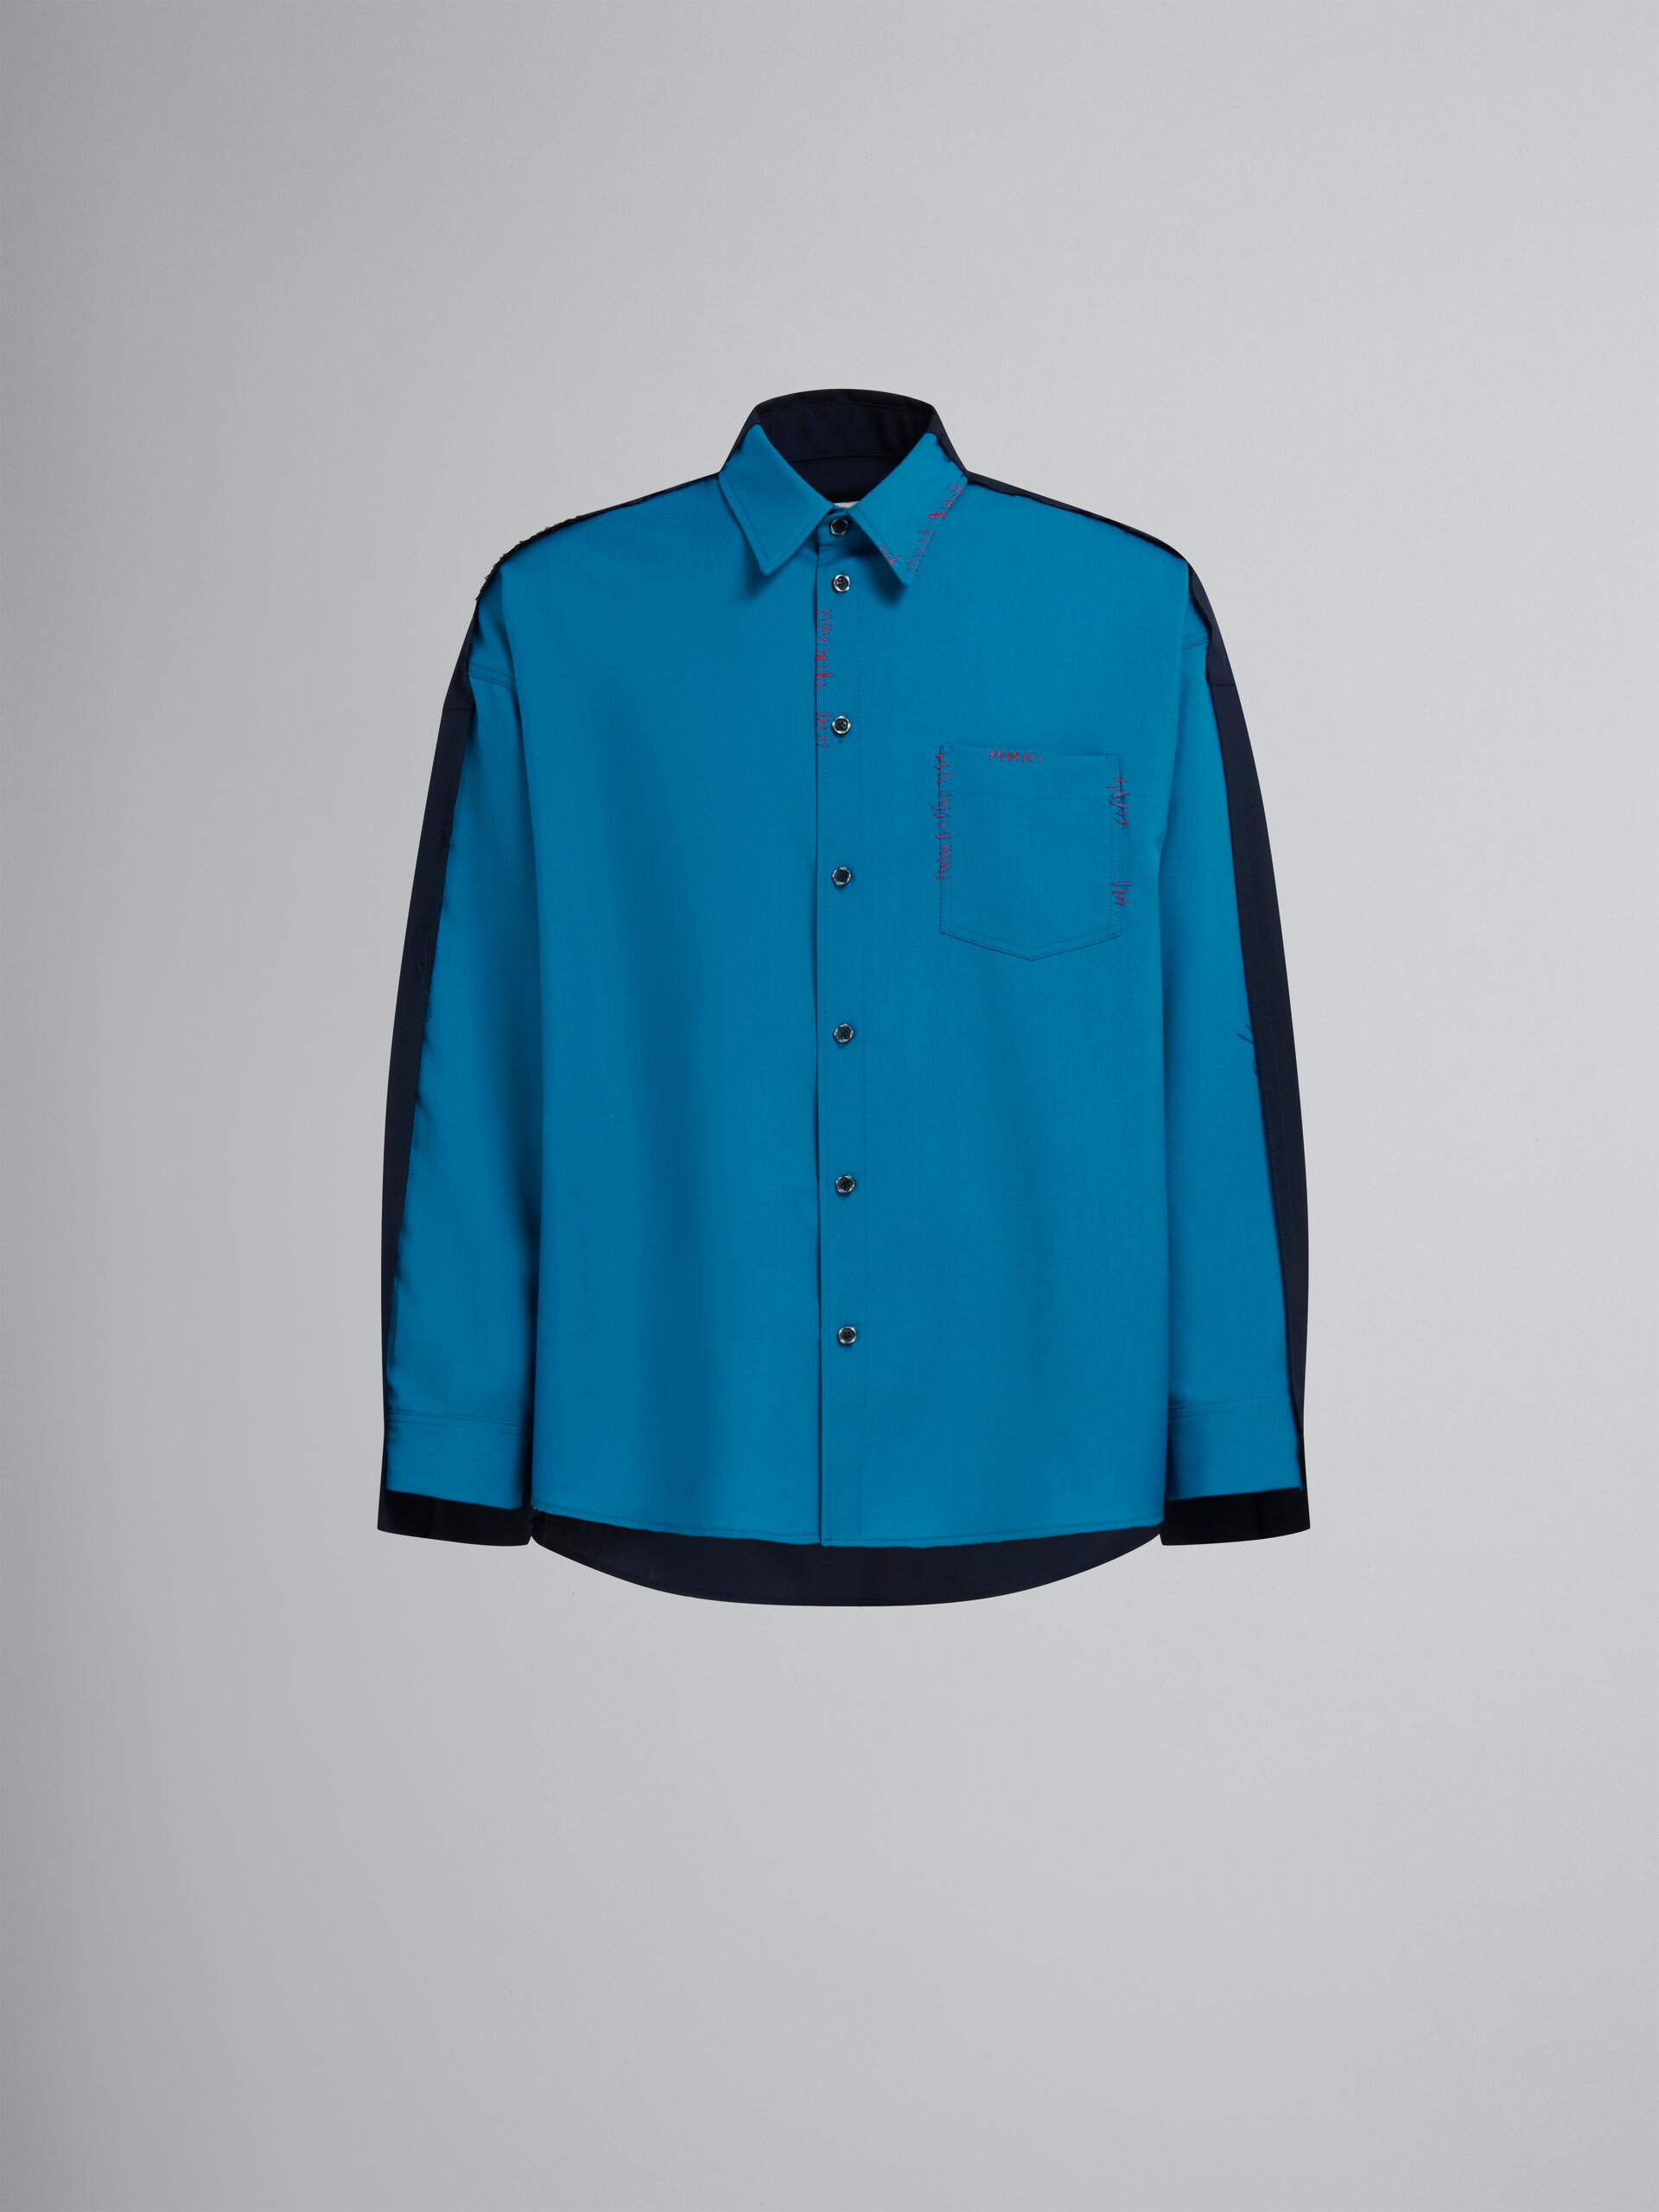 Blue tropical wool shirt with contrast back - Shirts - Image 1